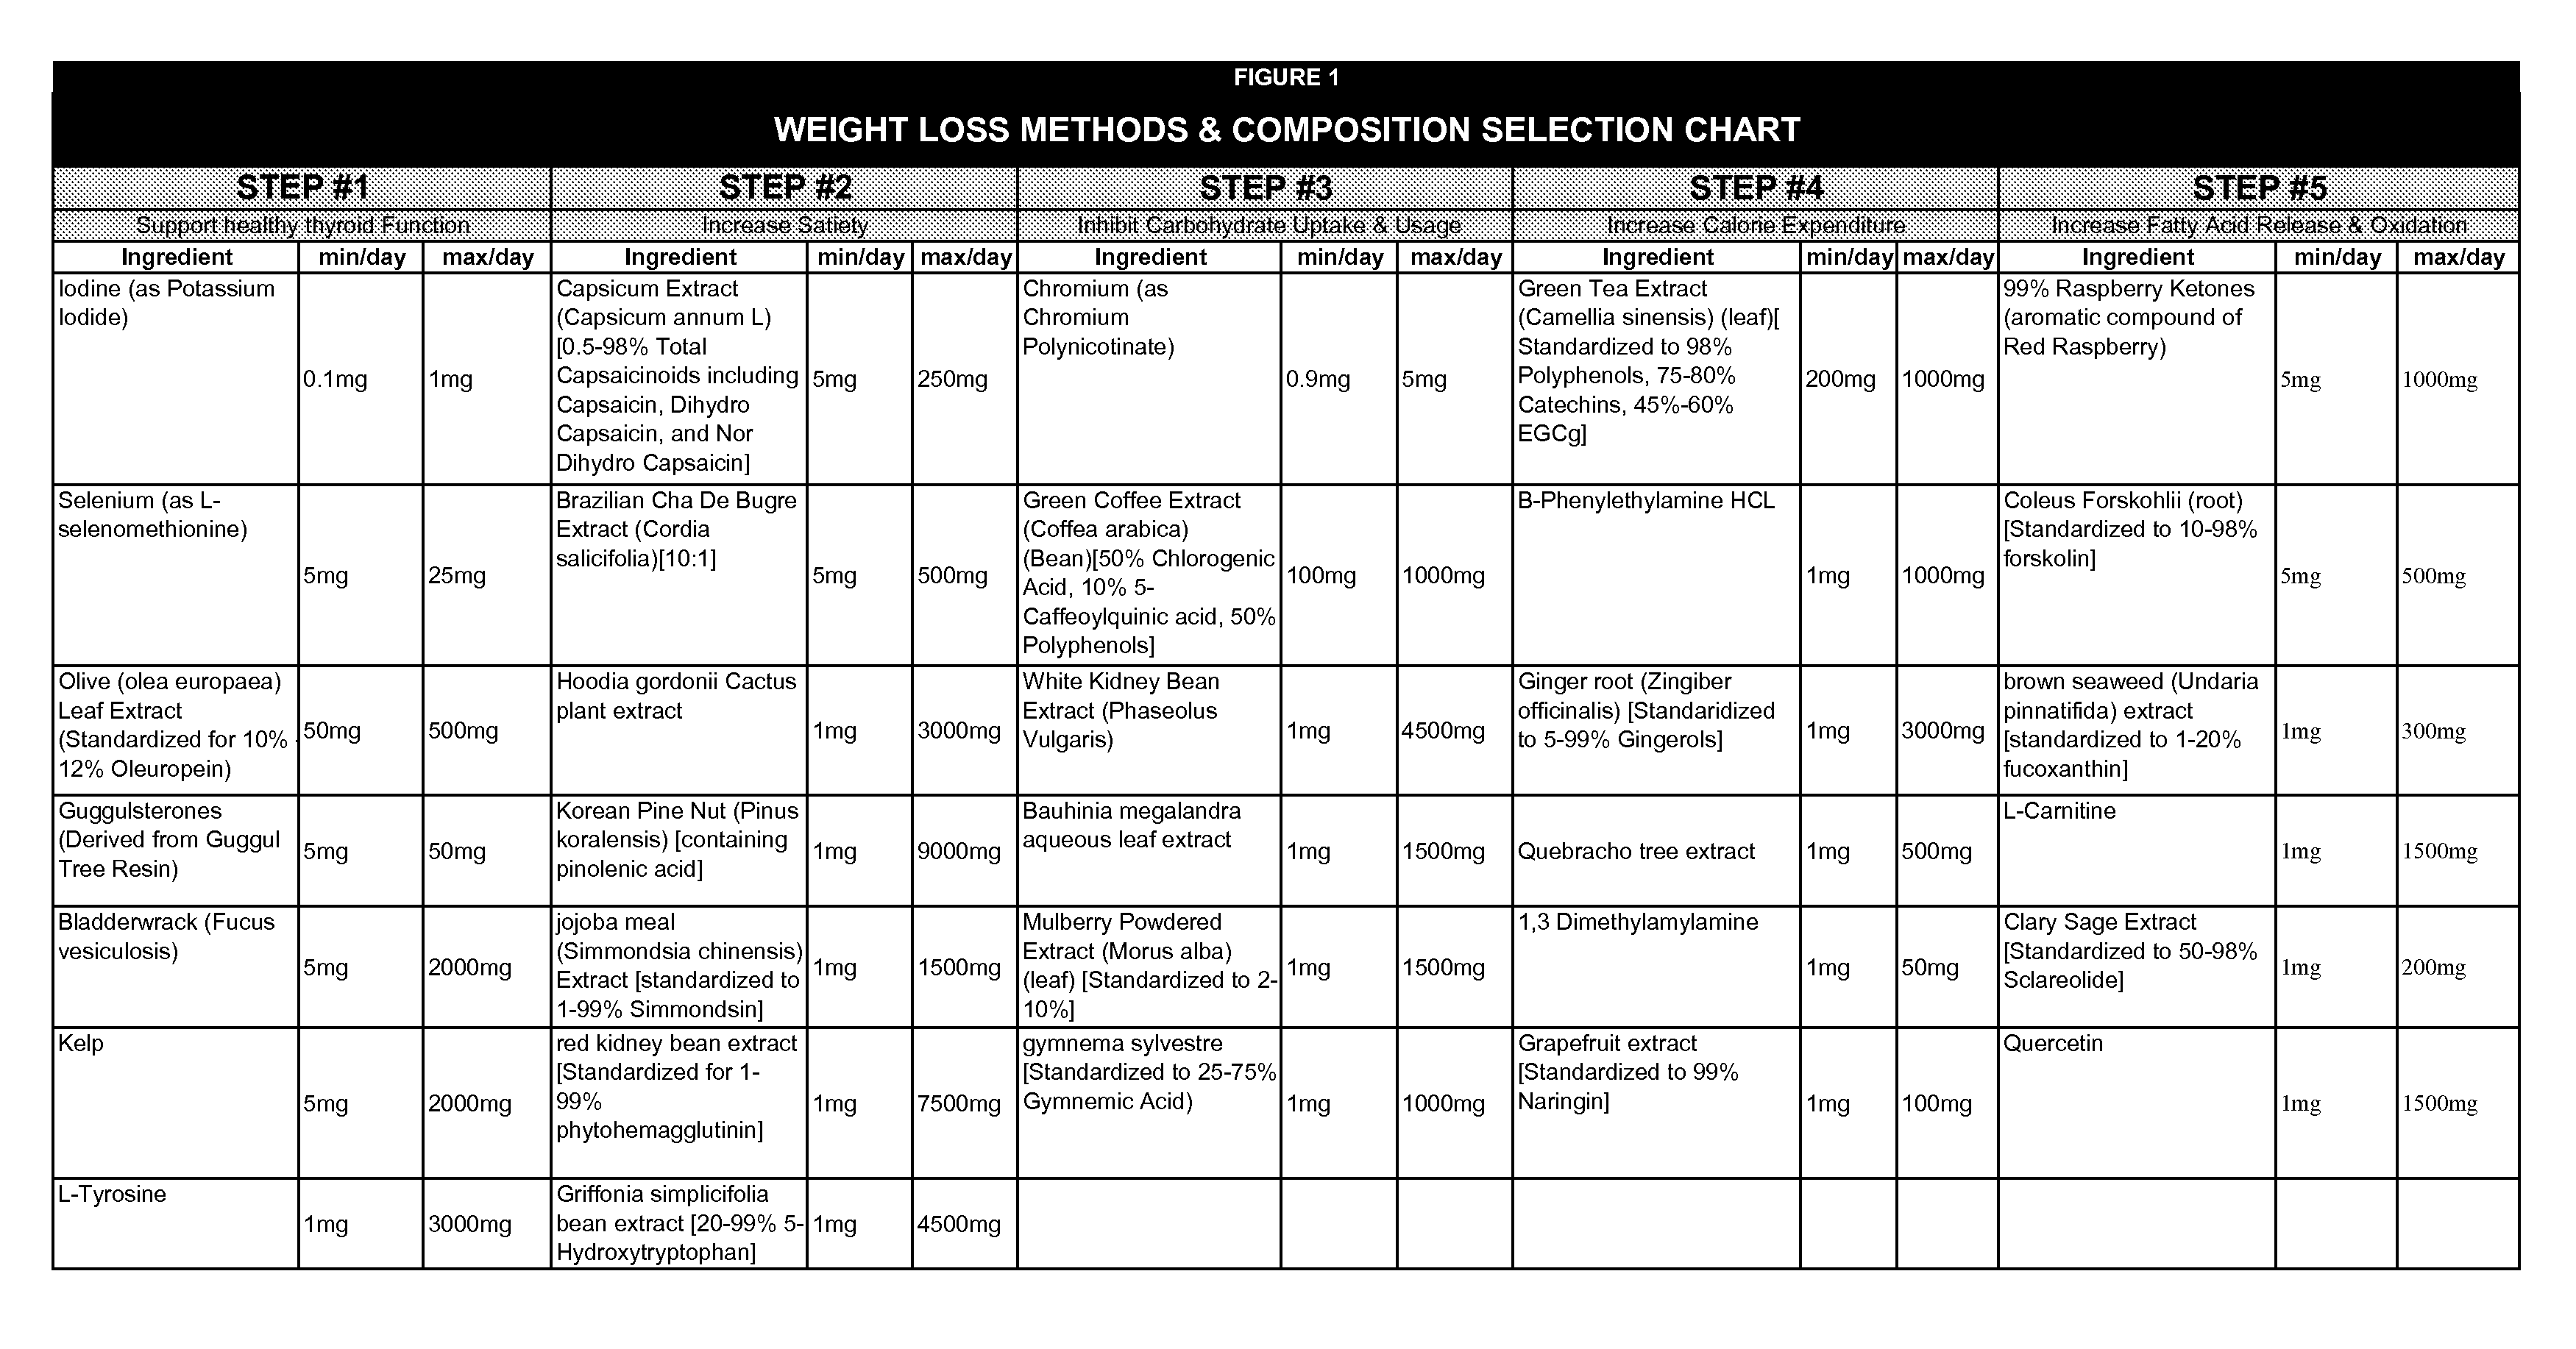 Weight Loss Composition and Method